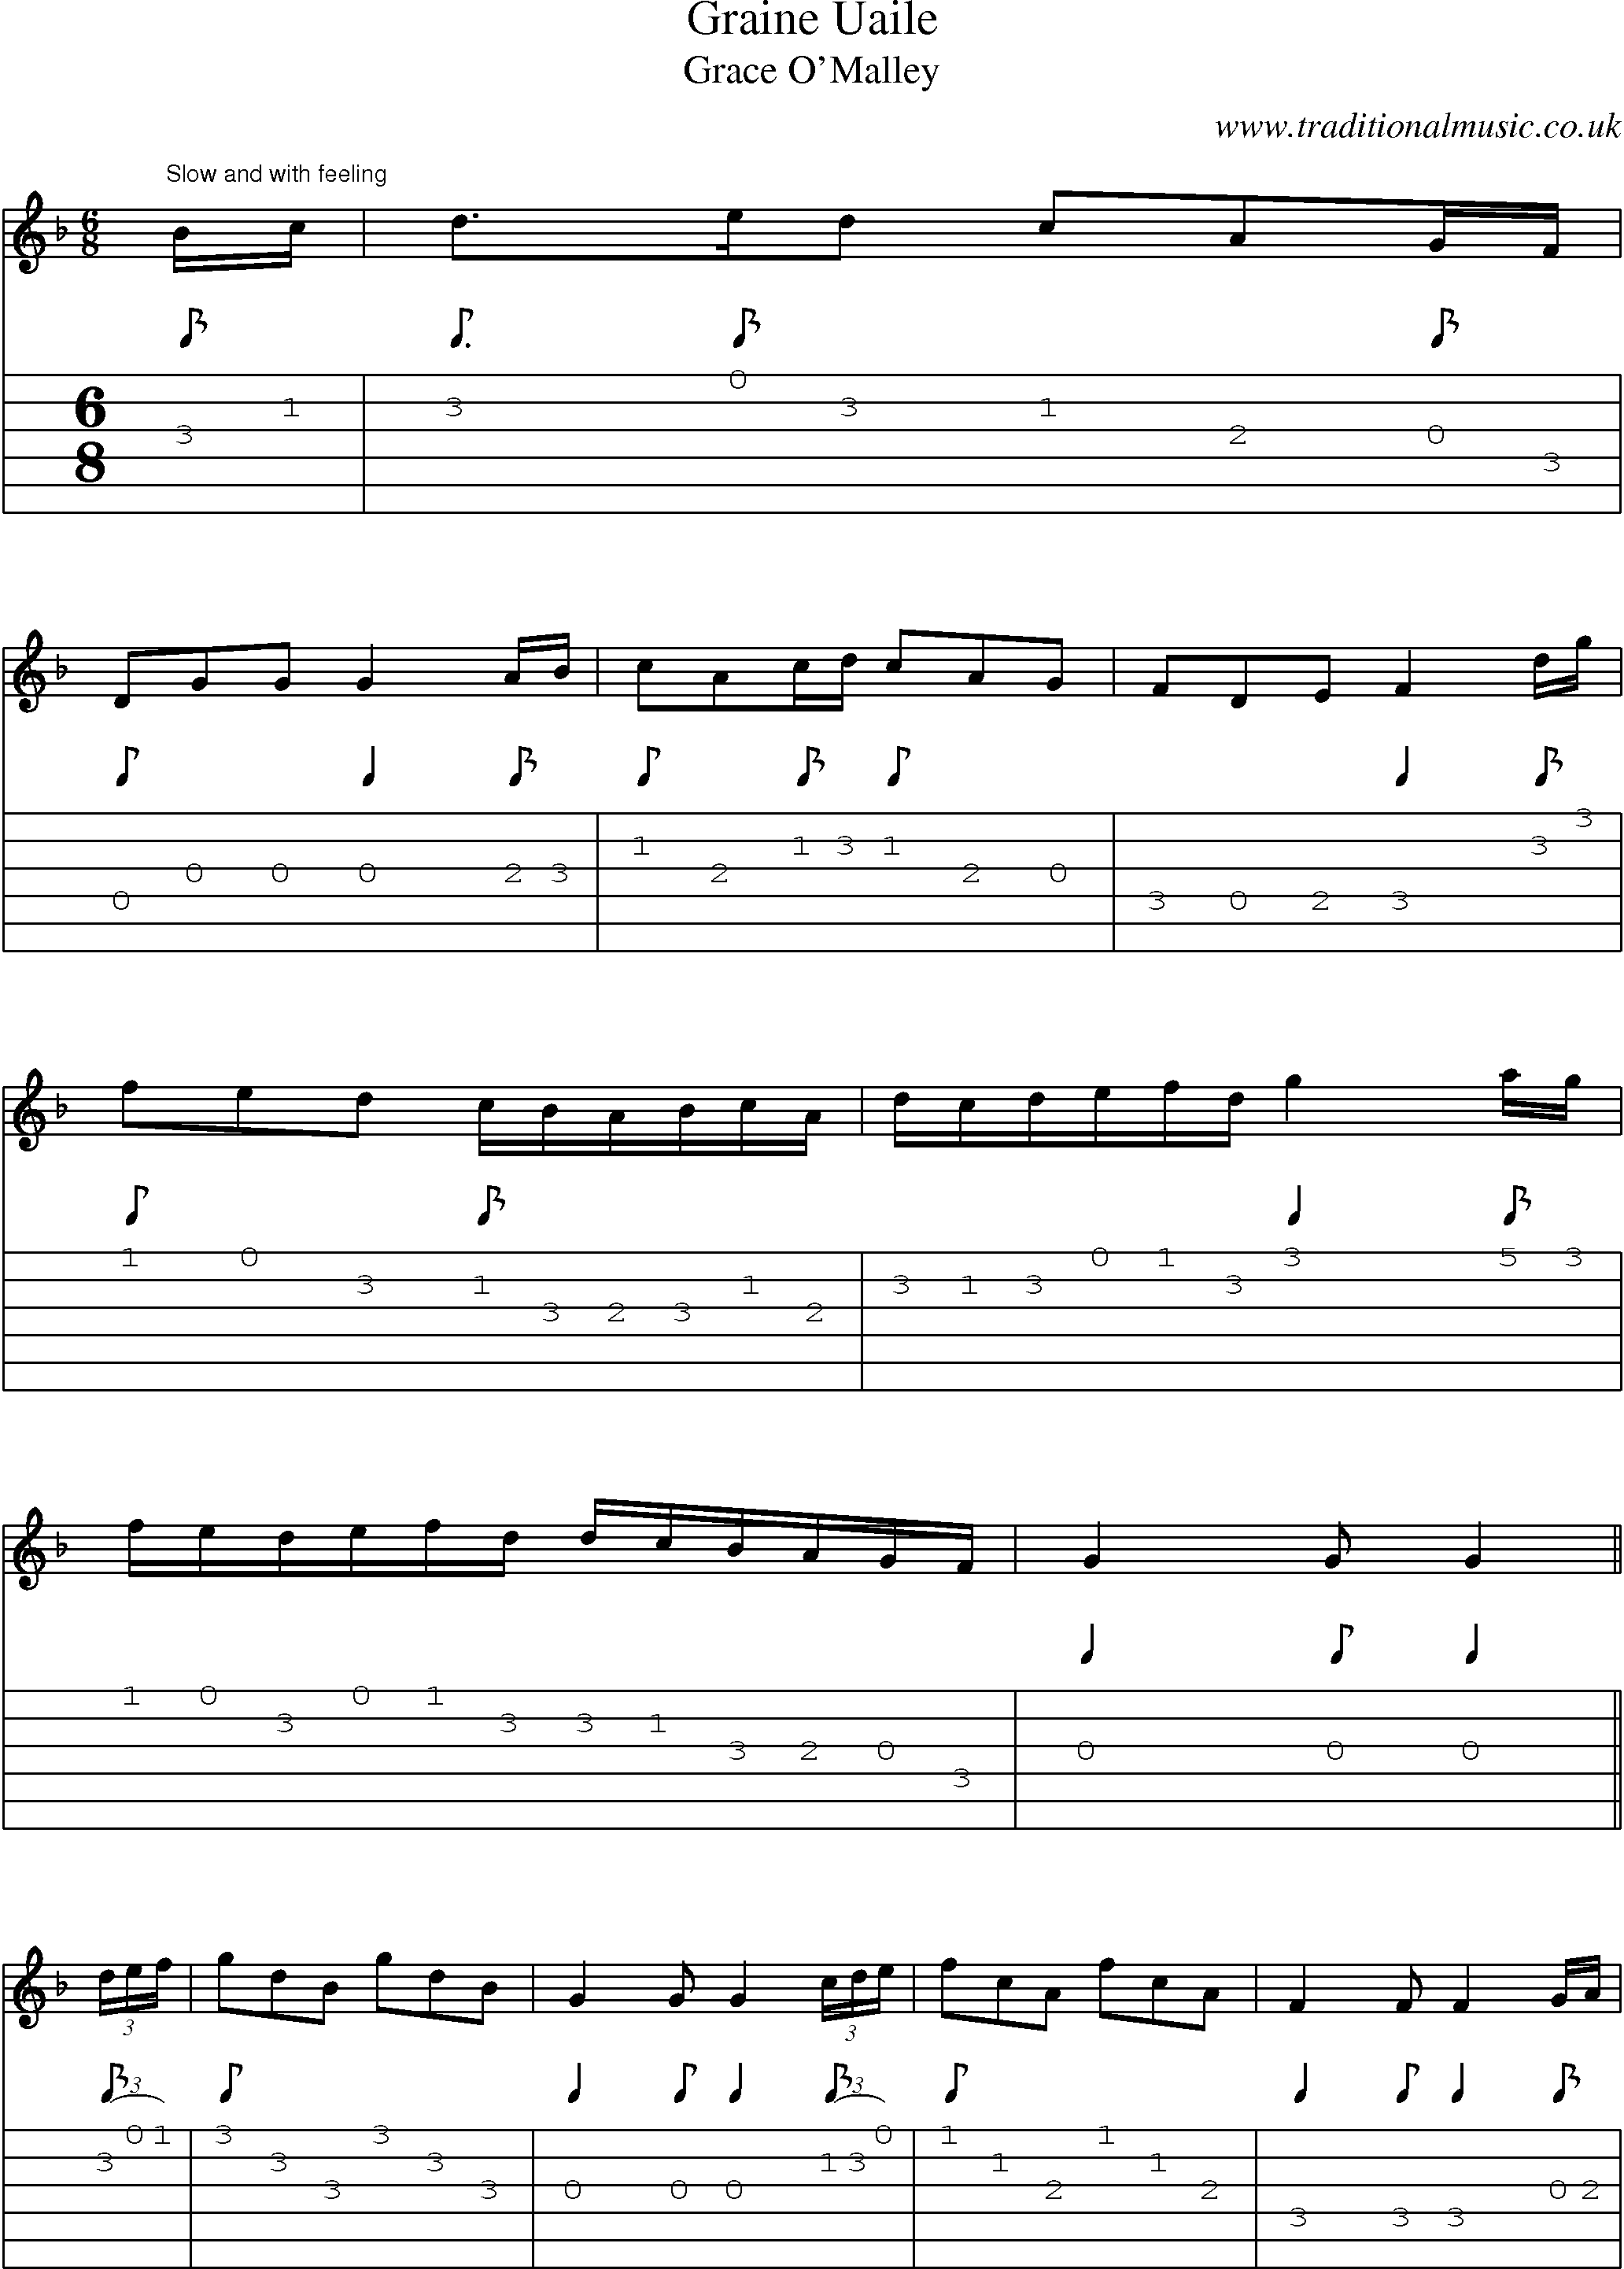 Music Score and Guitar Tabs for Graine Uaile